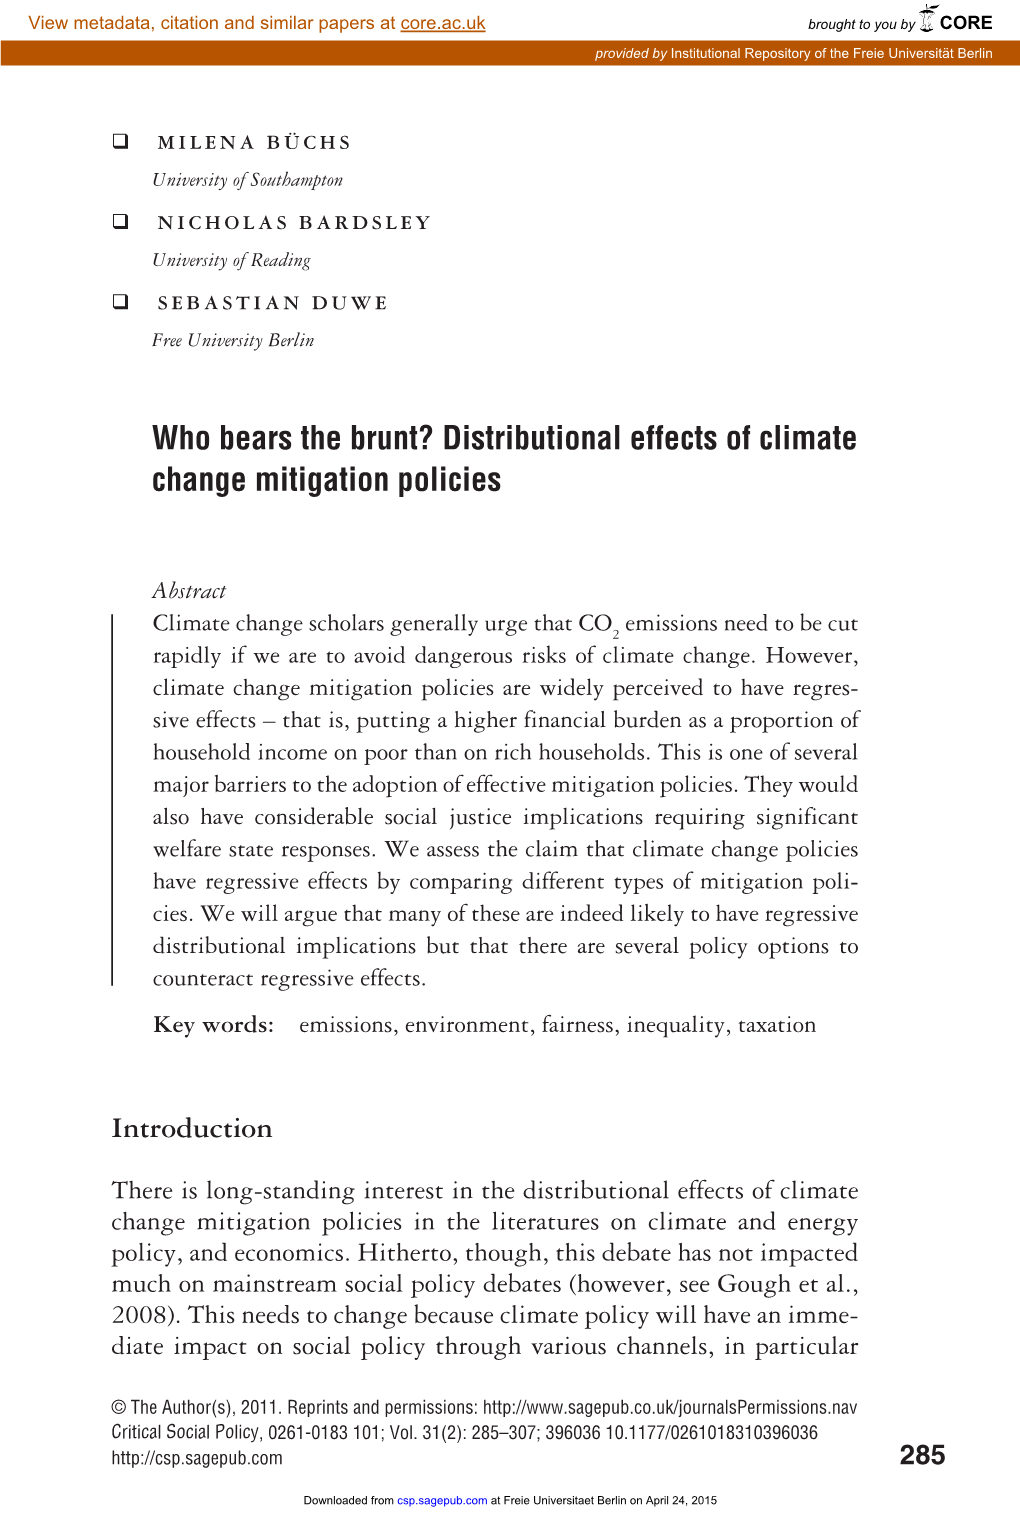 Who Bears the Brunt? Distributional Effects of Climate Change Mitigation Policies